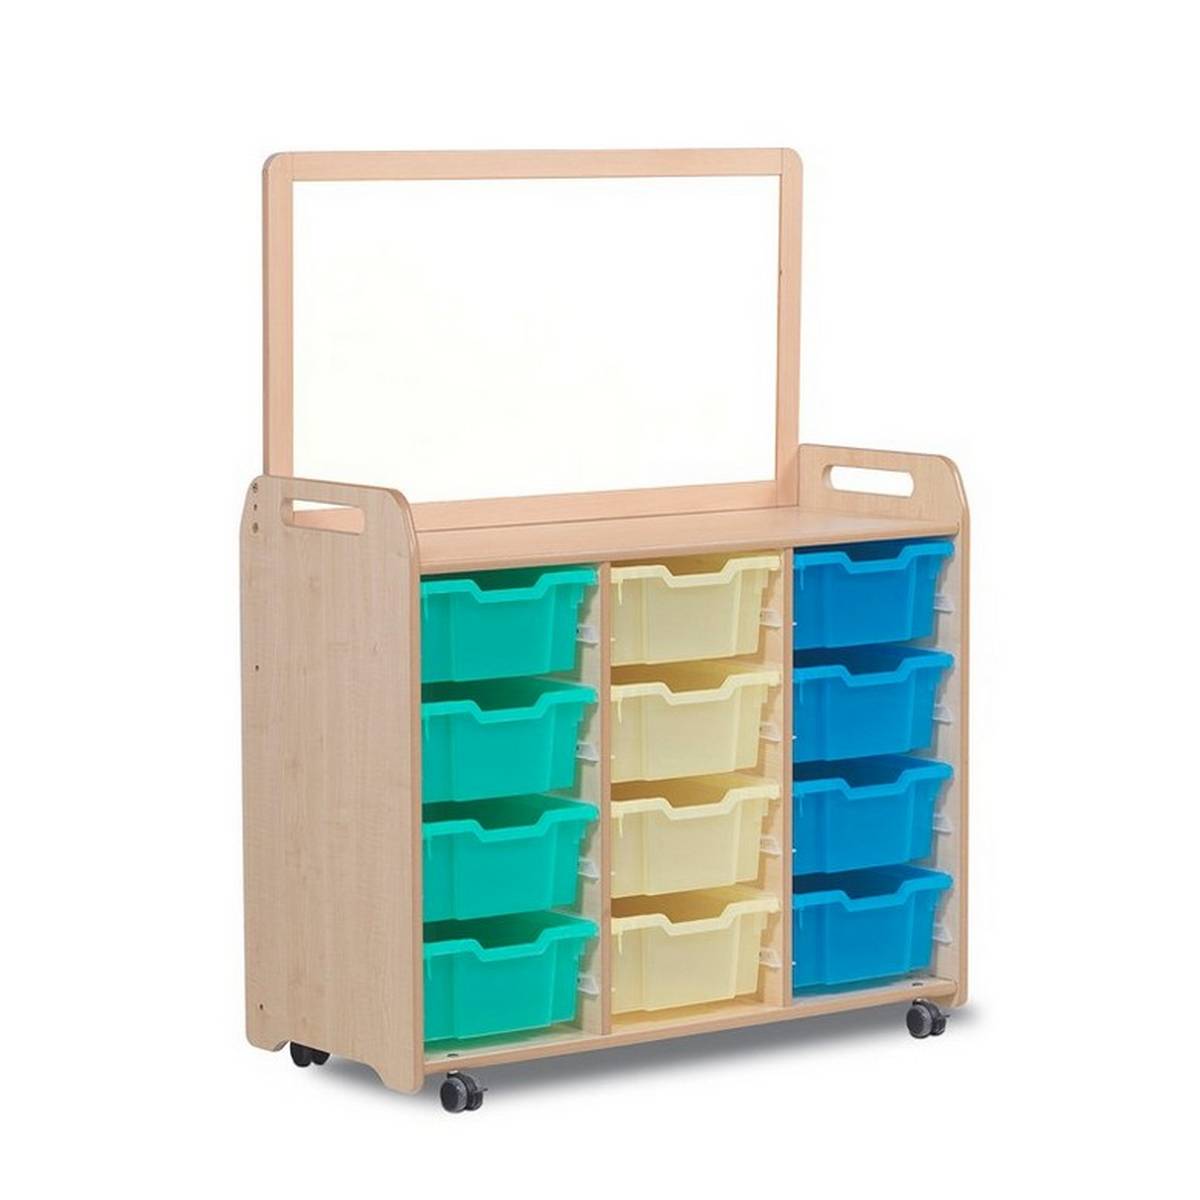 Triple column storage with magnetic top divider Dimensions: 1550(H) X 1045(W) X 465mm(D)